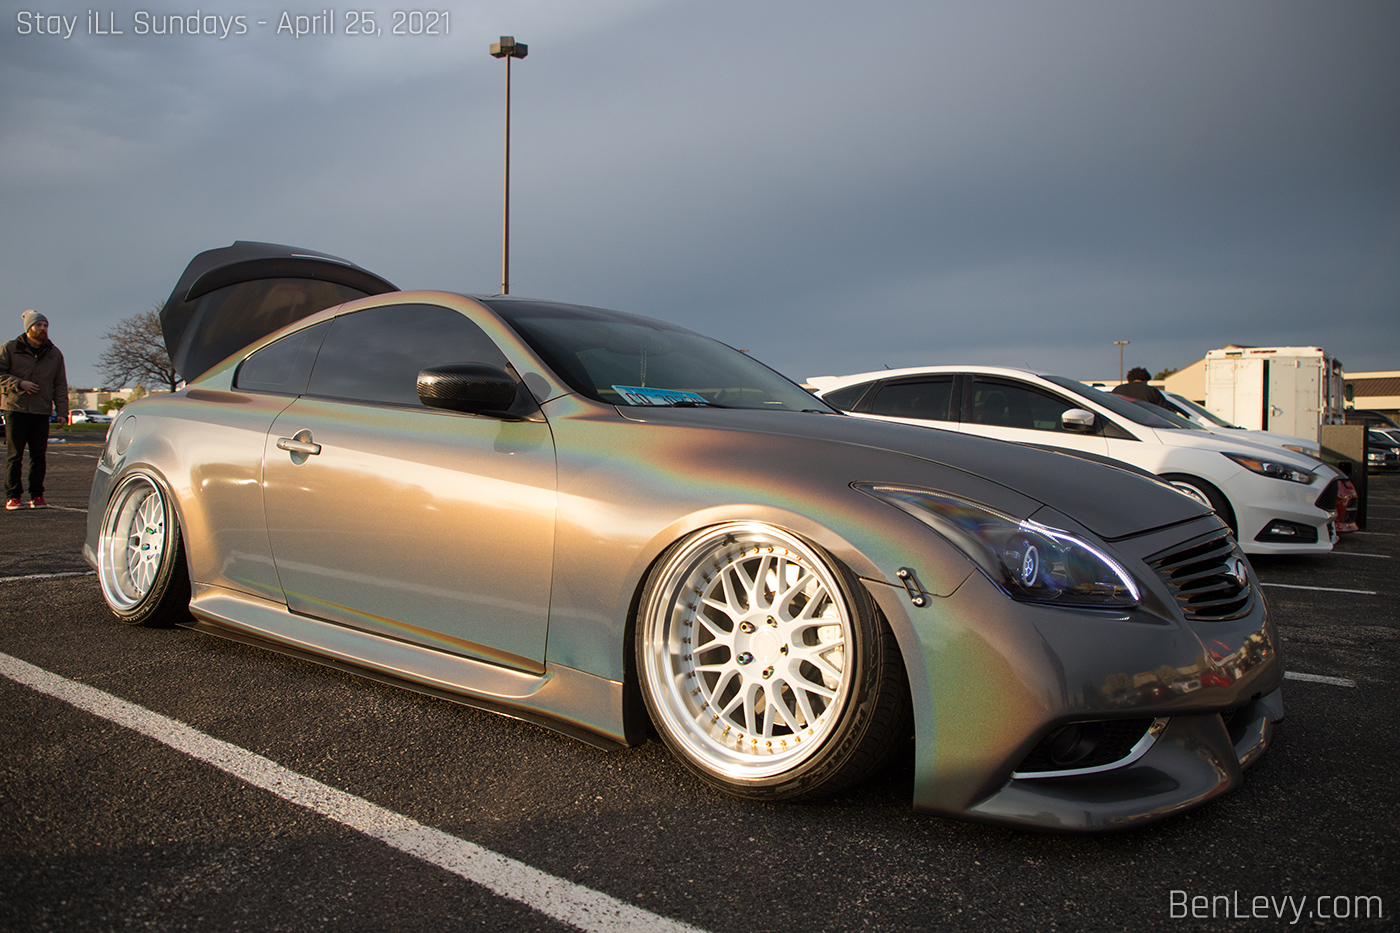 Hector's Wrapped Infiniti G37 IPL